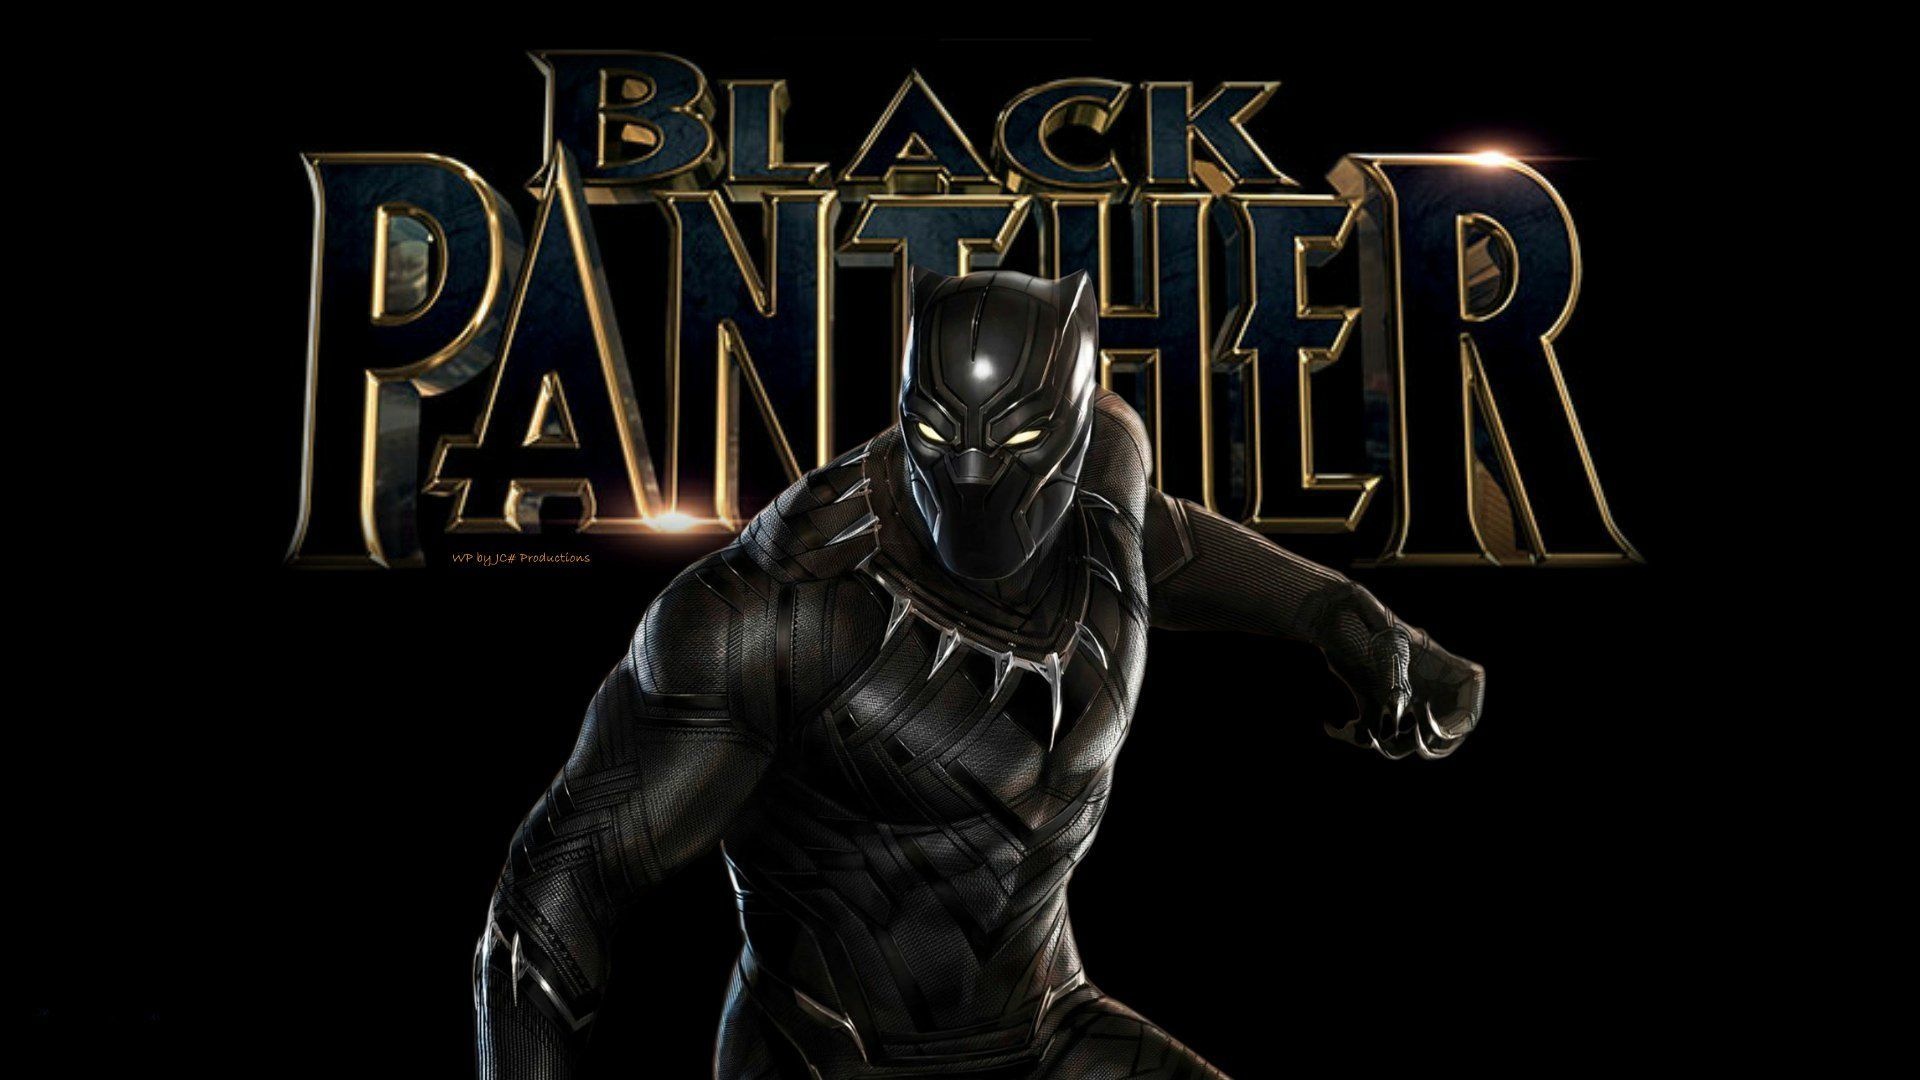 2021 black panther, New movie wallpapers, Marvel's masterpiece, Cinematic excellence, 1920x1080 Full HD Desktop